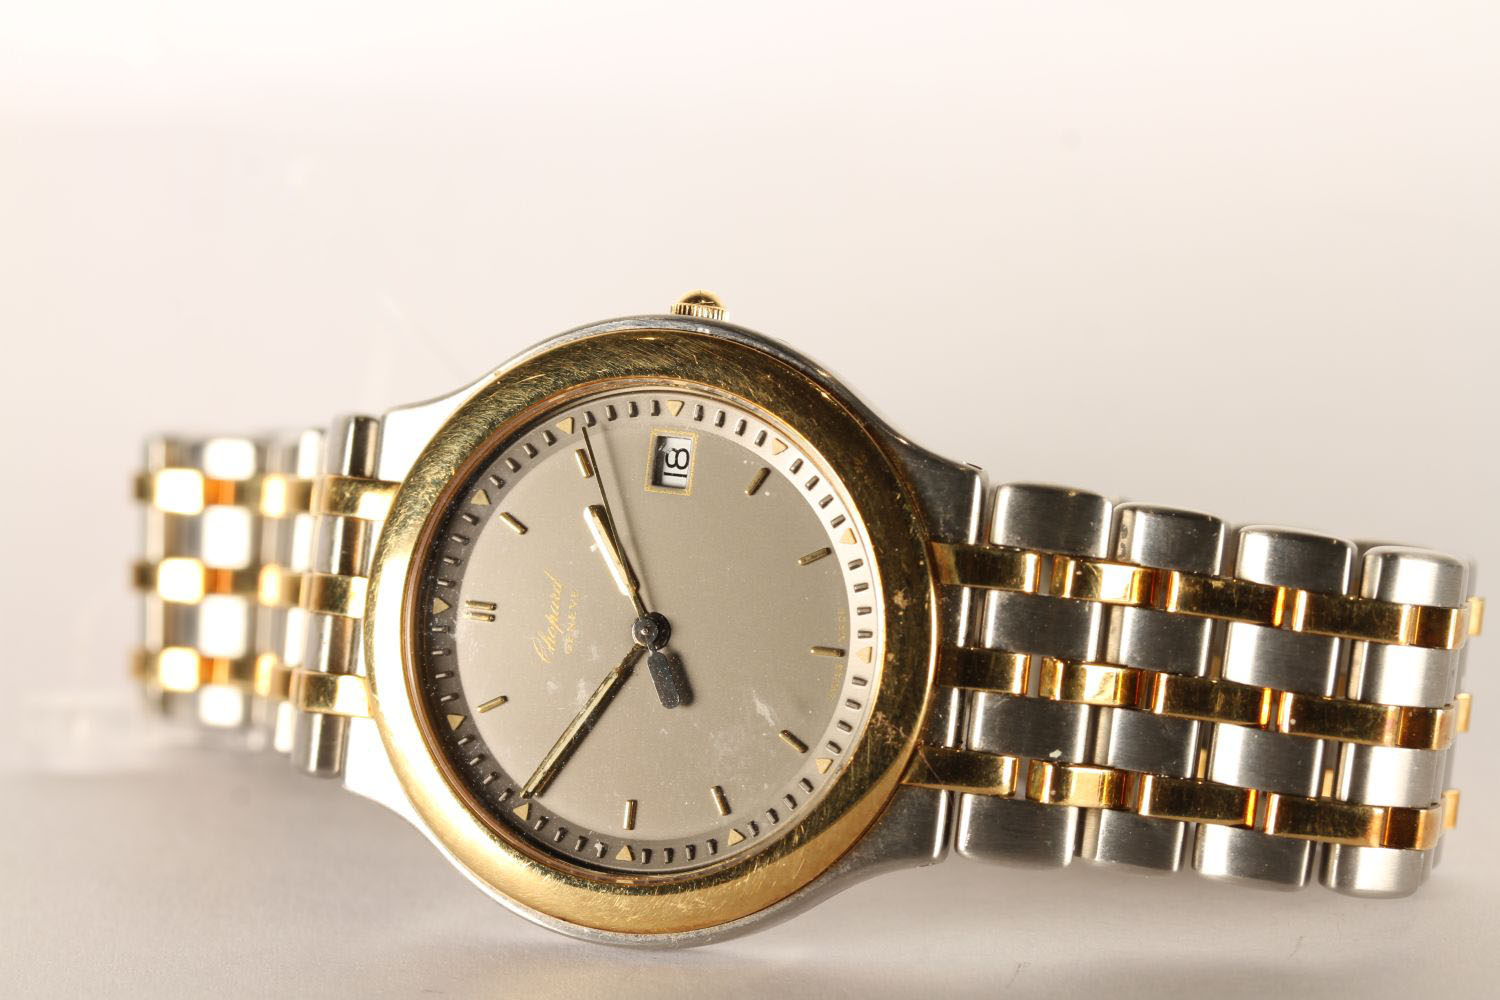 UNISEX CHOPARD BI COLOUR MONTE CARLO WRISTWATCH, circular grey dial with gold baton hour markers and - Image 3 of 5